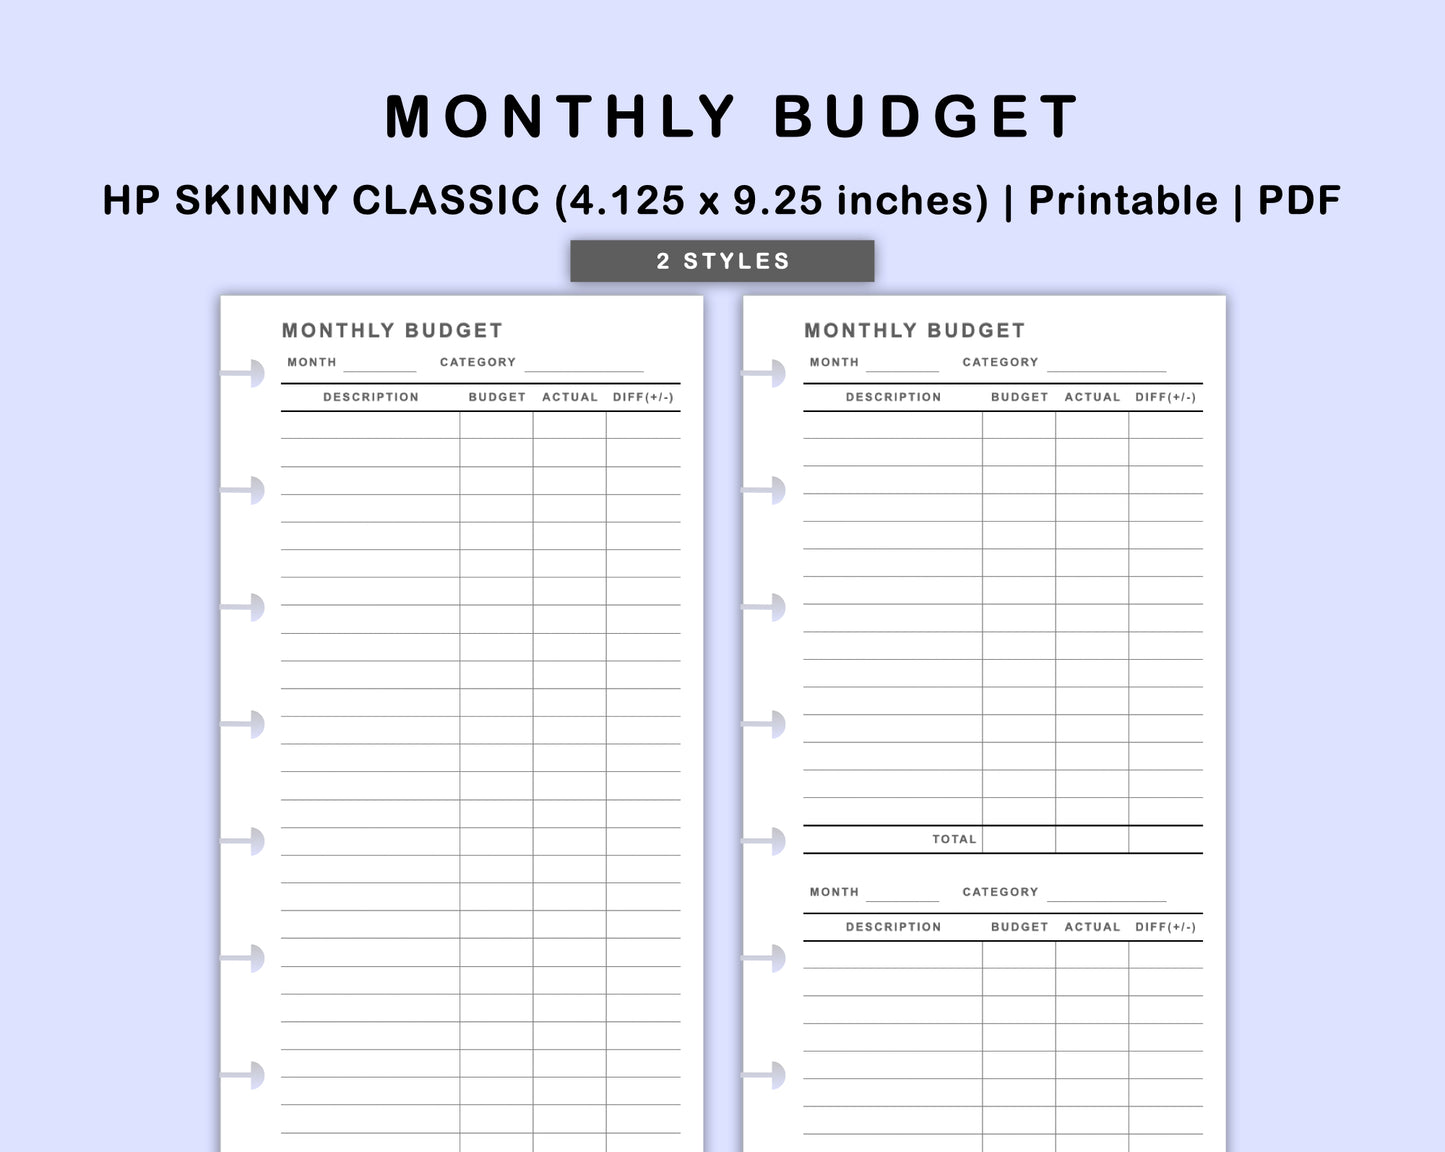 Skinny Classic HP Inserts - Monthly Budget